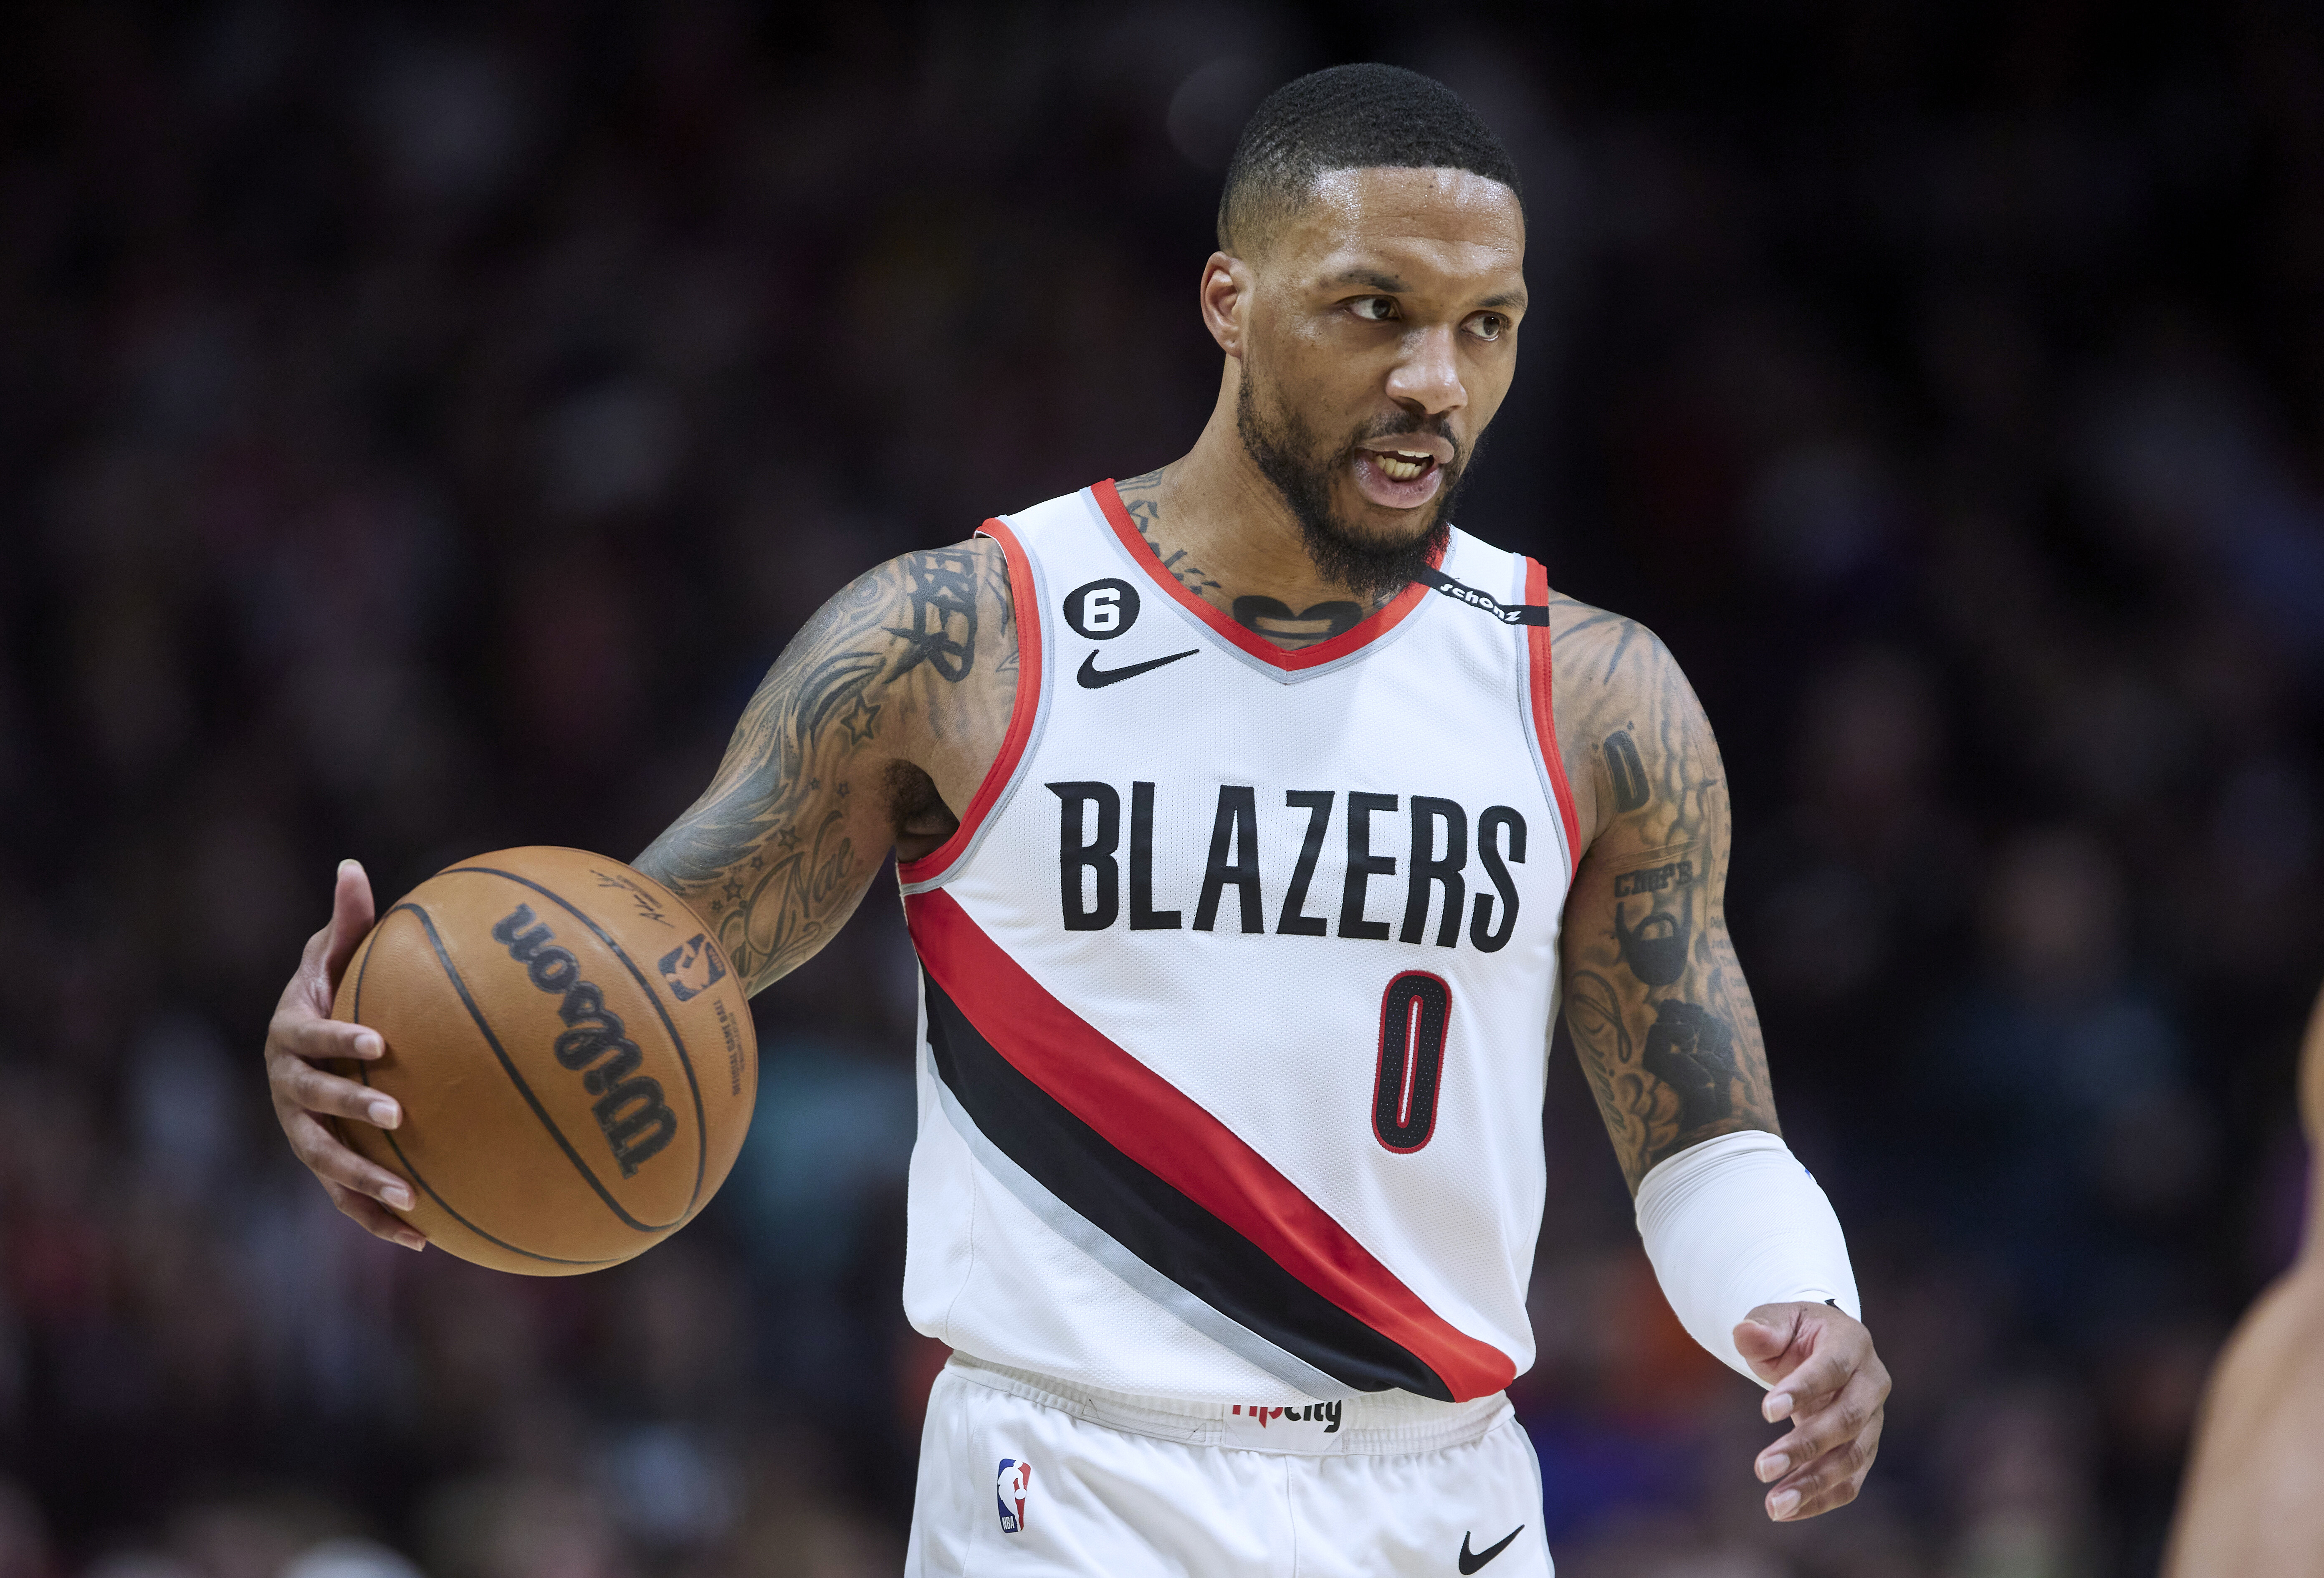 LATEST NEWS: Portland Trail Blazers are vying for the NBA's best center rotation